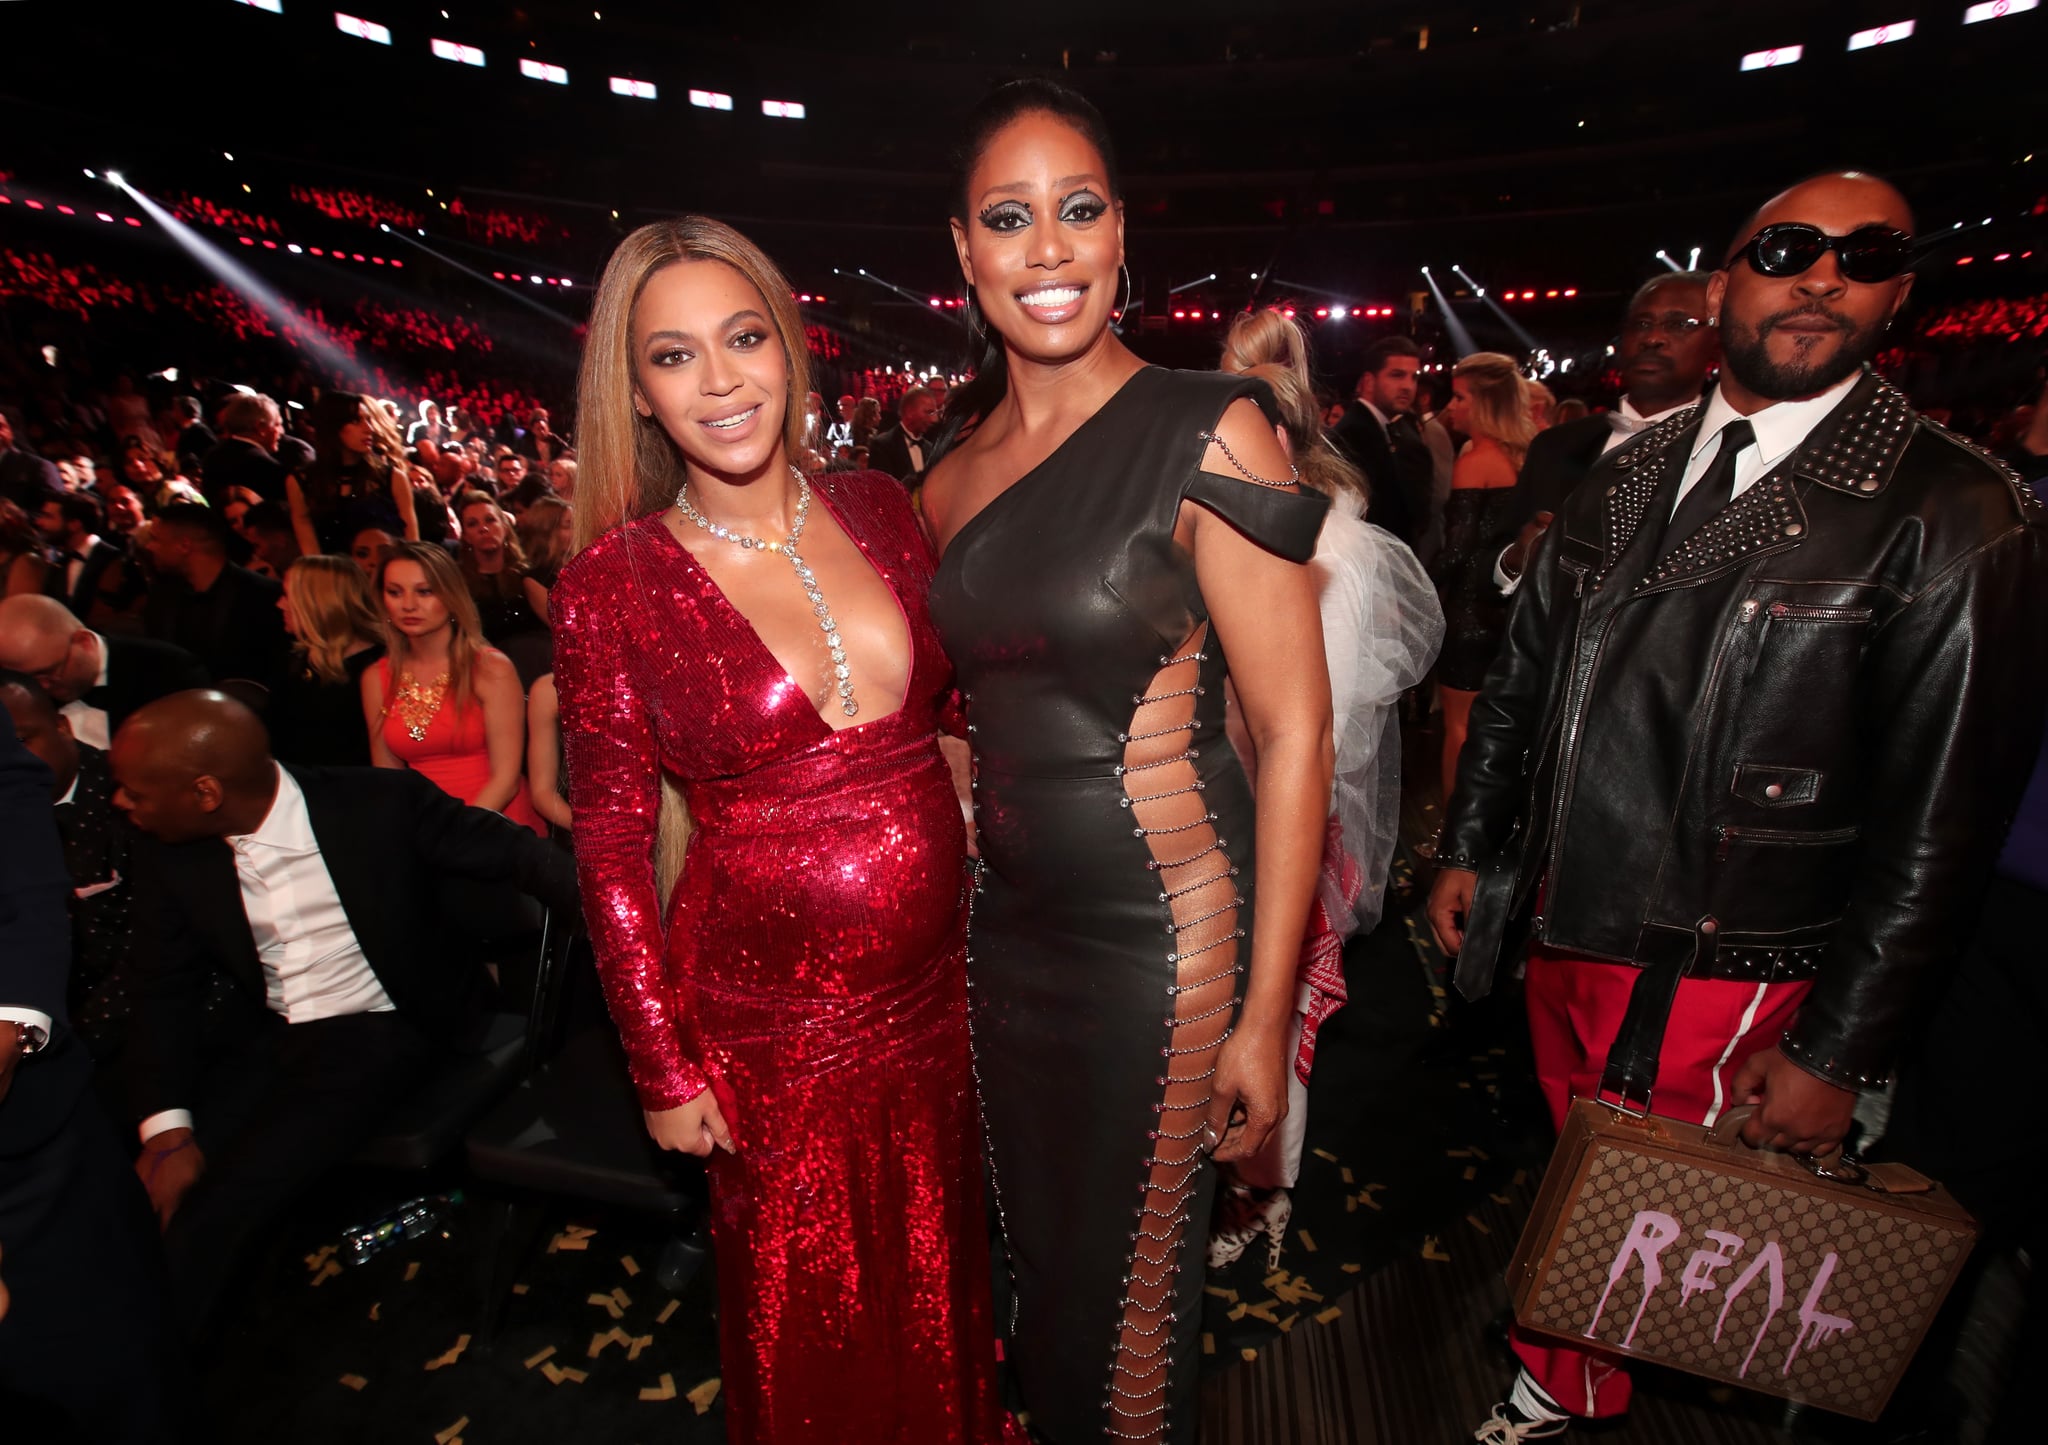 E! Host Laverne Cox Glows With Golden Makeup on Grammys 2023 Red Carpet:  Photo 4889340, 2023 Grammys, Grammys, Laverne Cox Photos